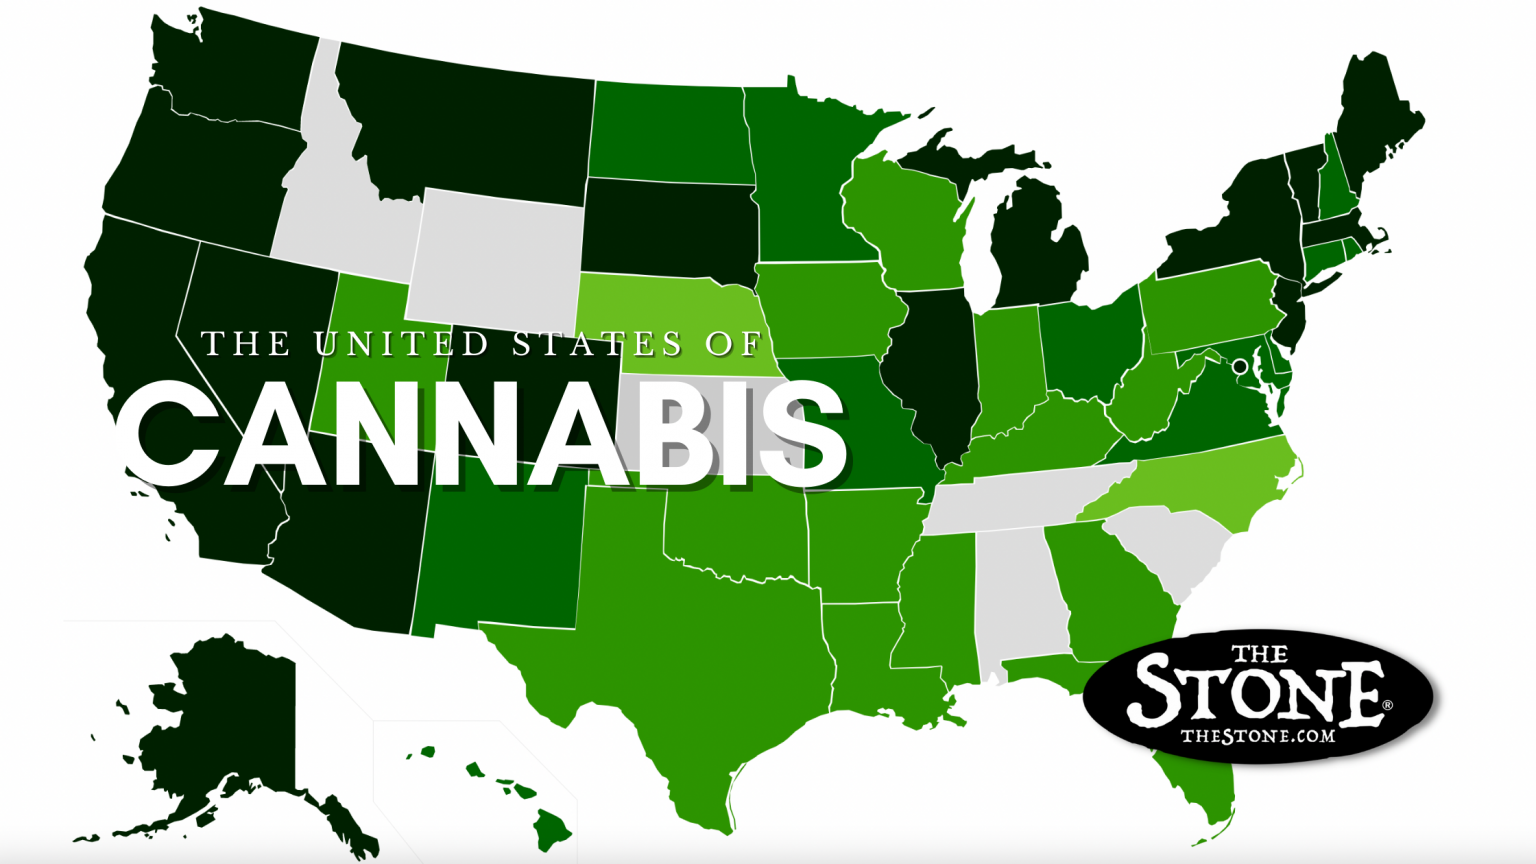 Recreational Marijuana Legalization is Sweeping the Nation! Here’s a